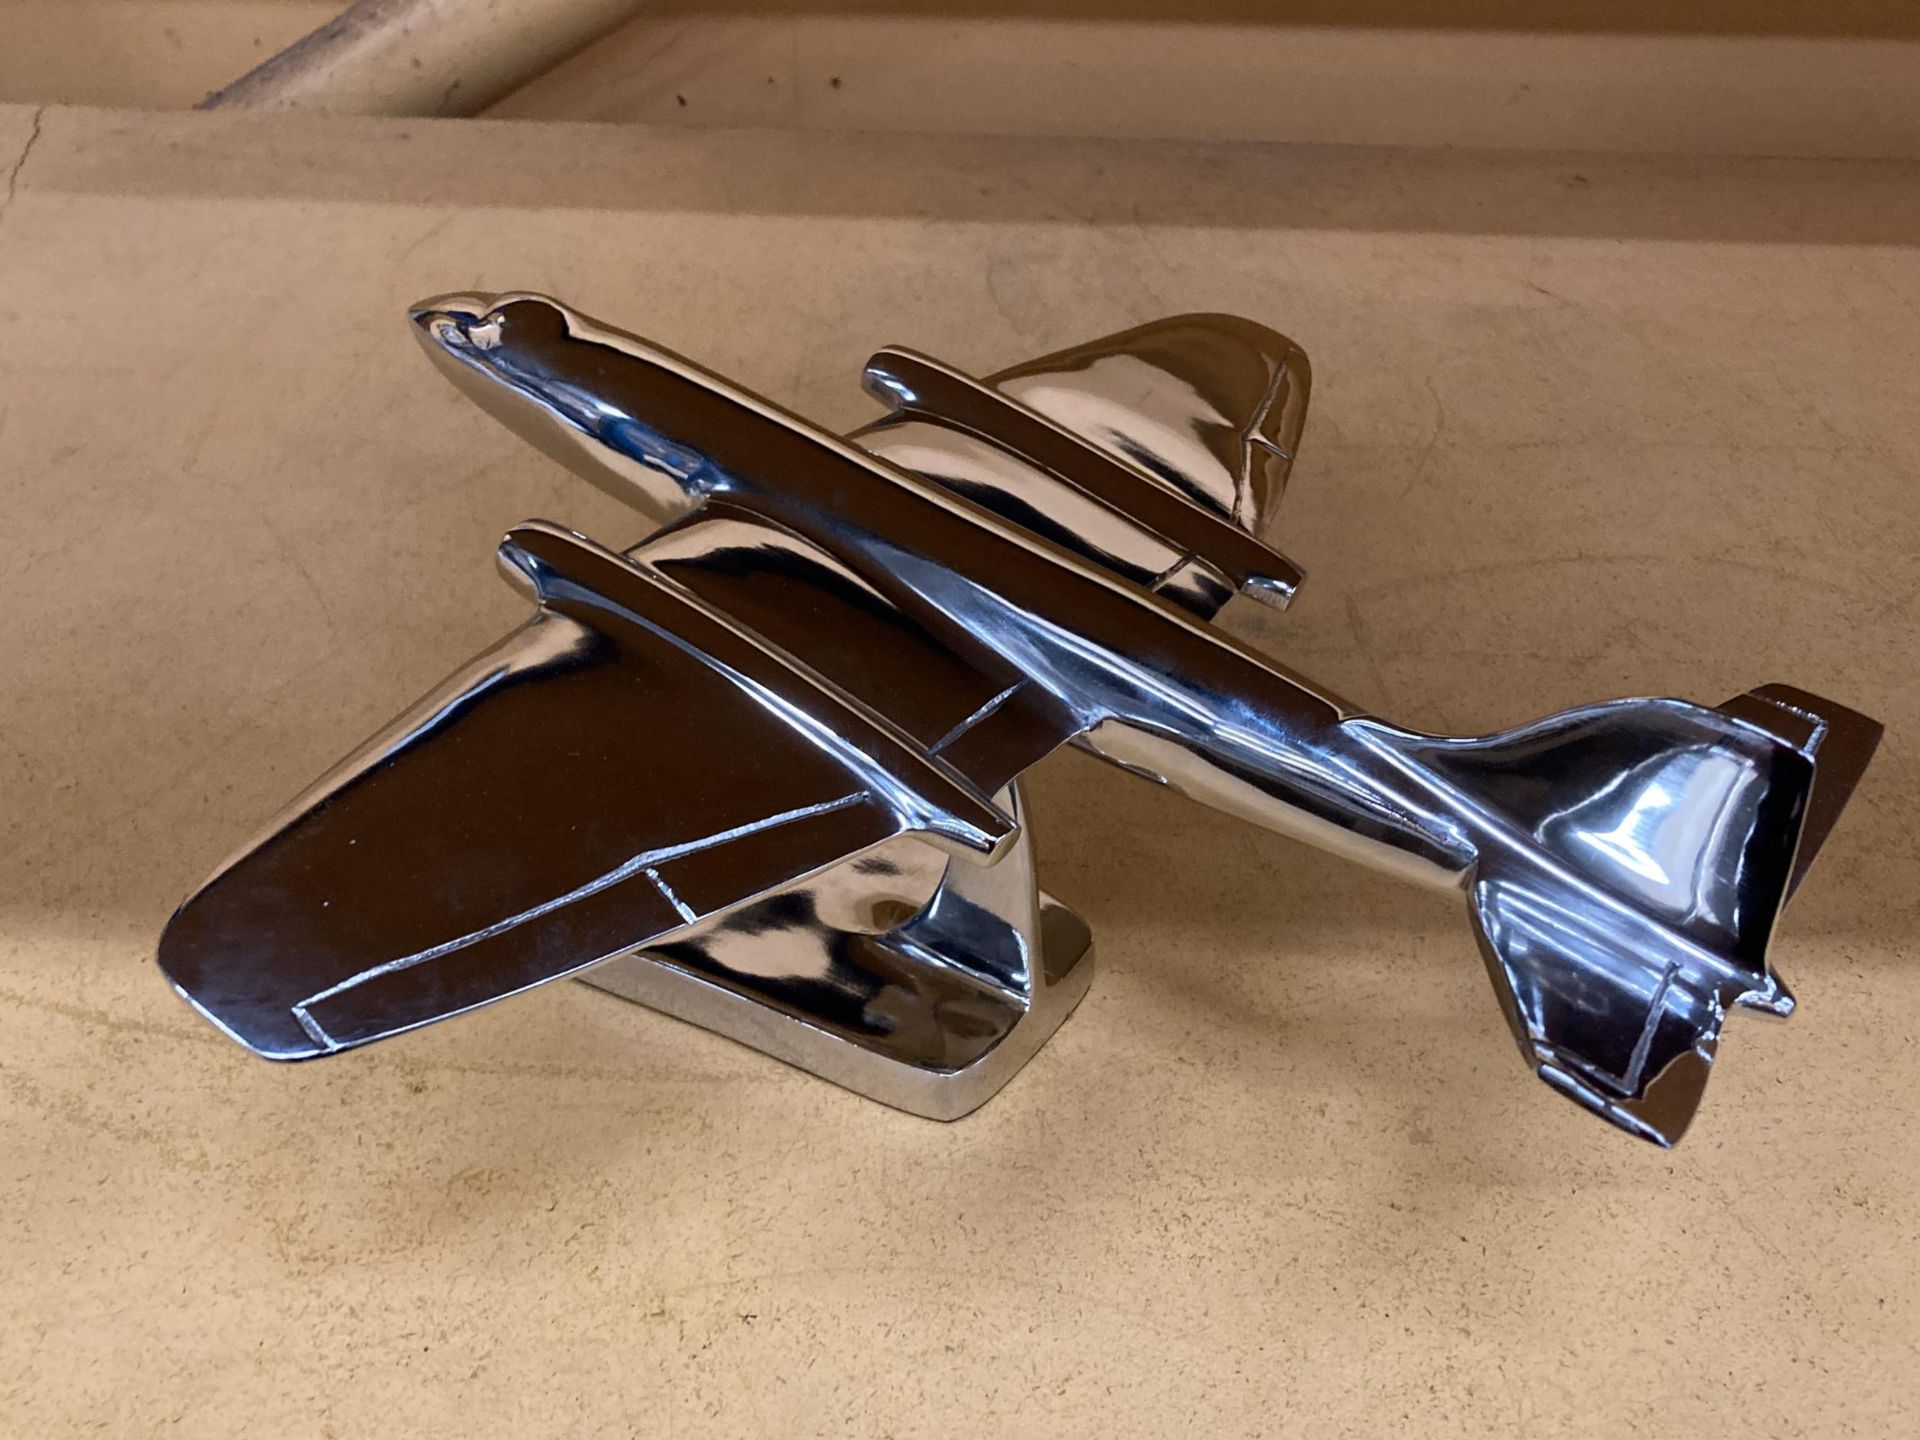 A LARGE CHROME MODEL OF A CANBERRA JET ON A PLINTH, HEIGHT 16CM, LENGTH 38CM - Image 3 of 3